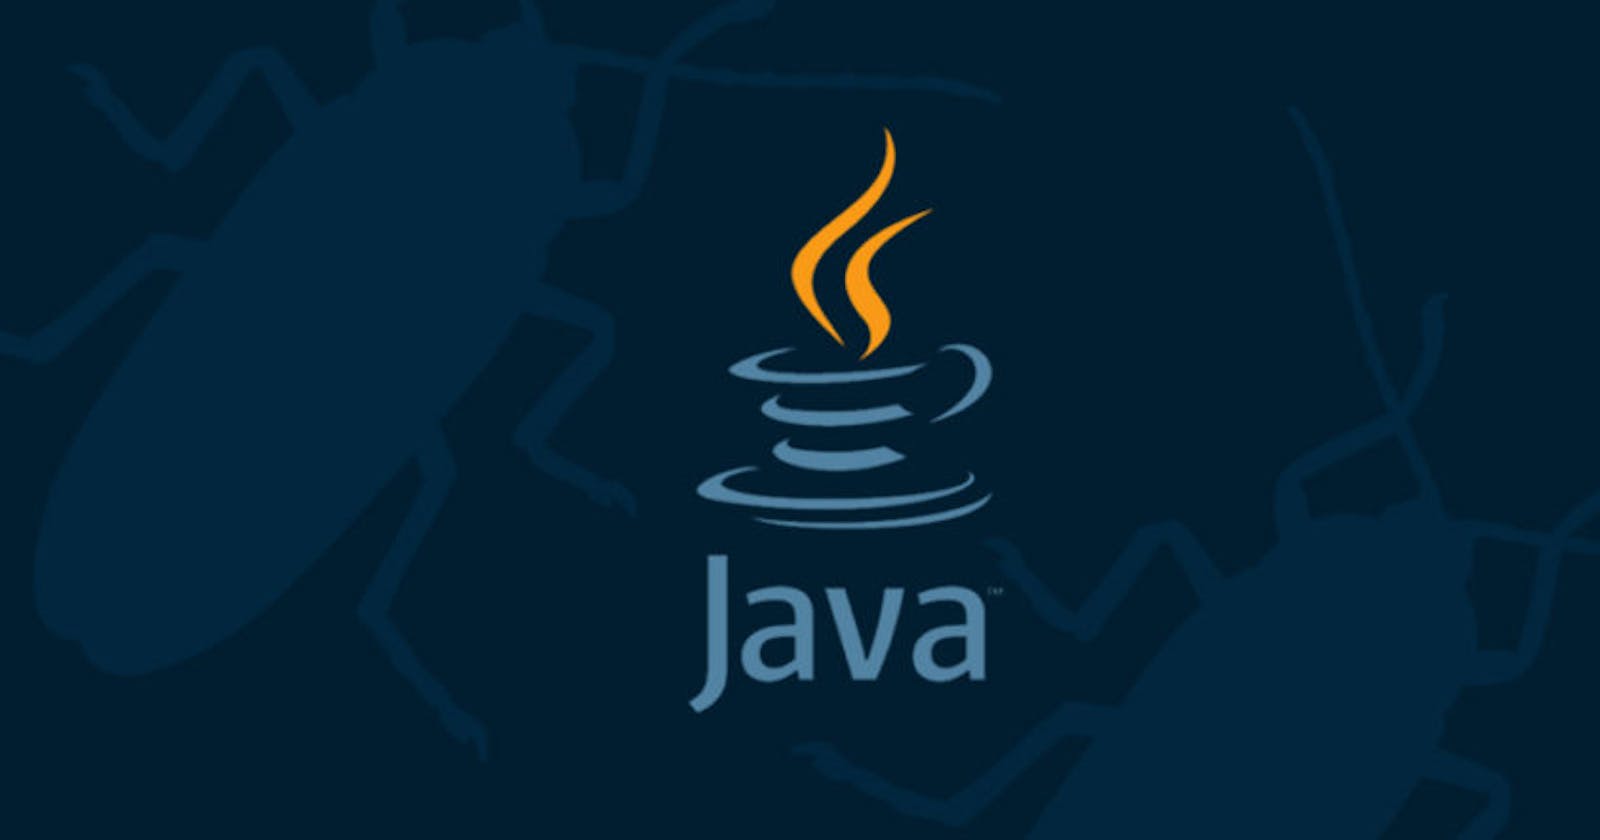 Day 10 - How is abstraction achieved in java?